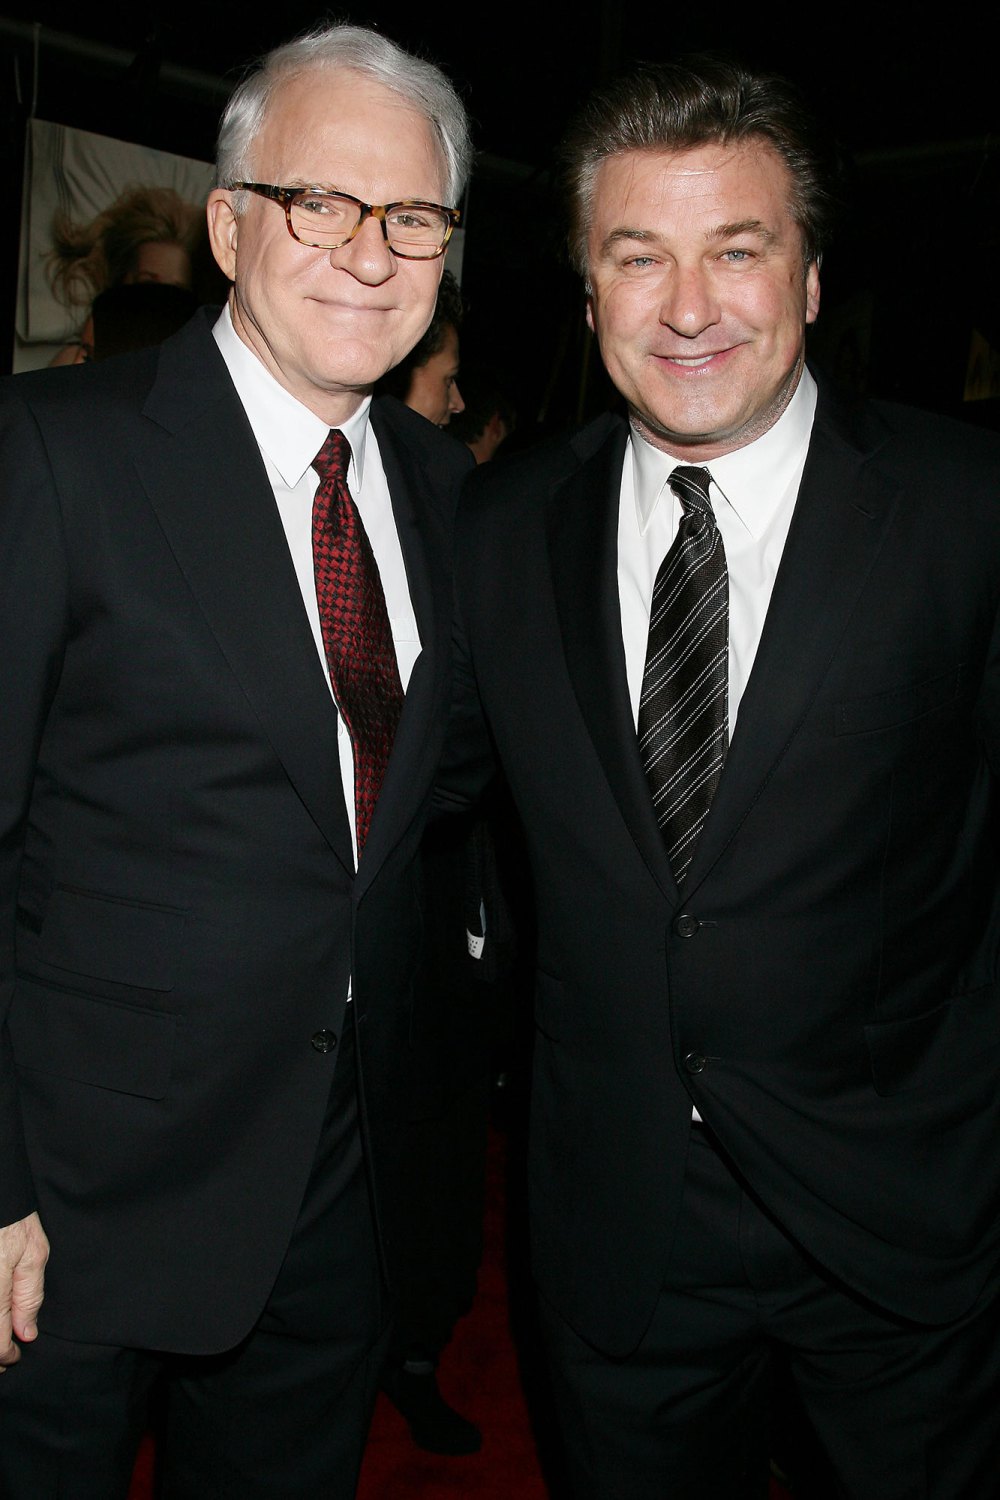 Alec Baldwin: Steve Martin and I Did “Great” at the Oscars